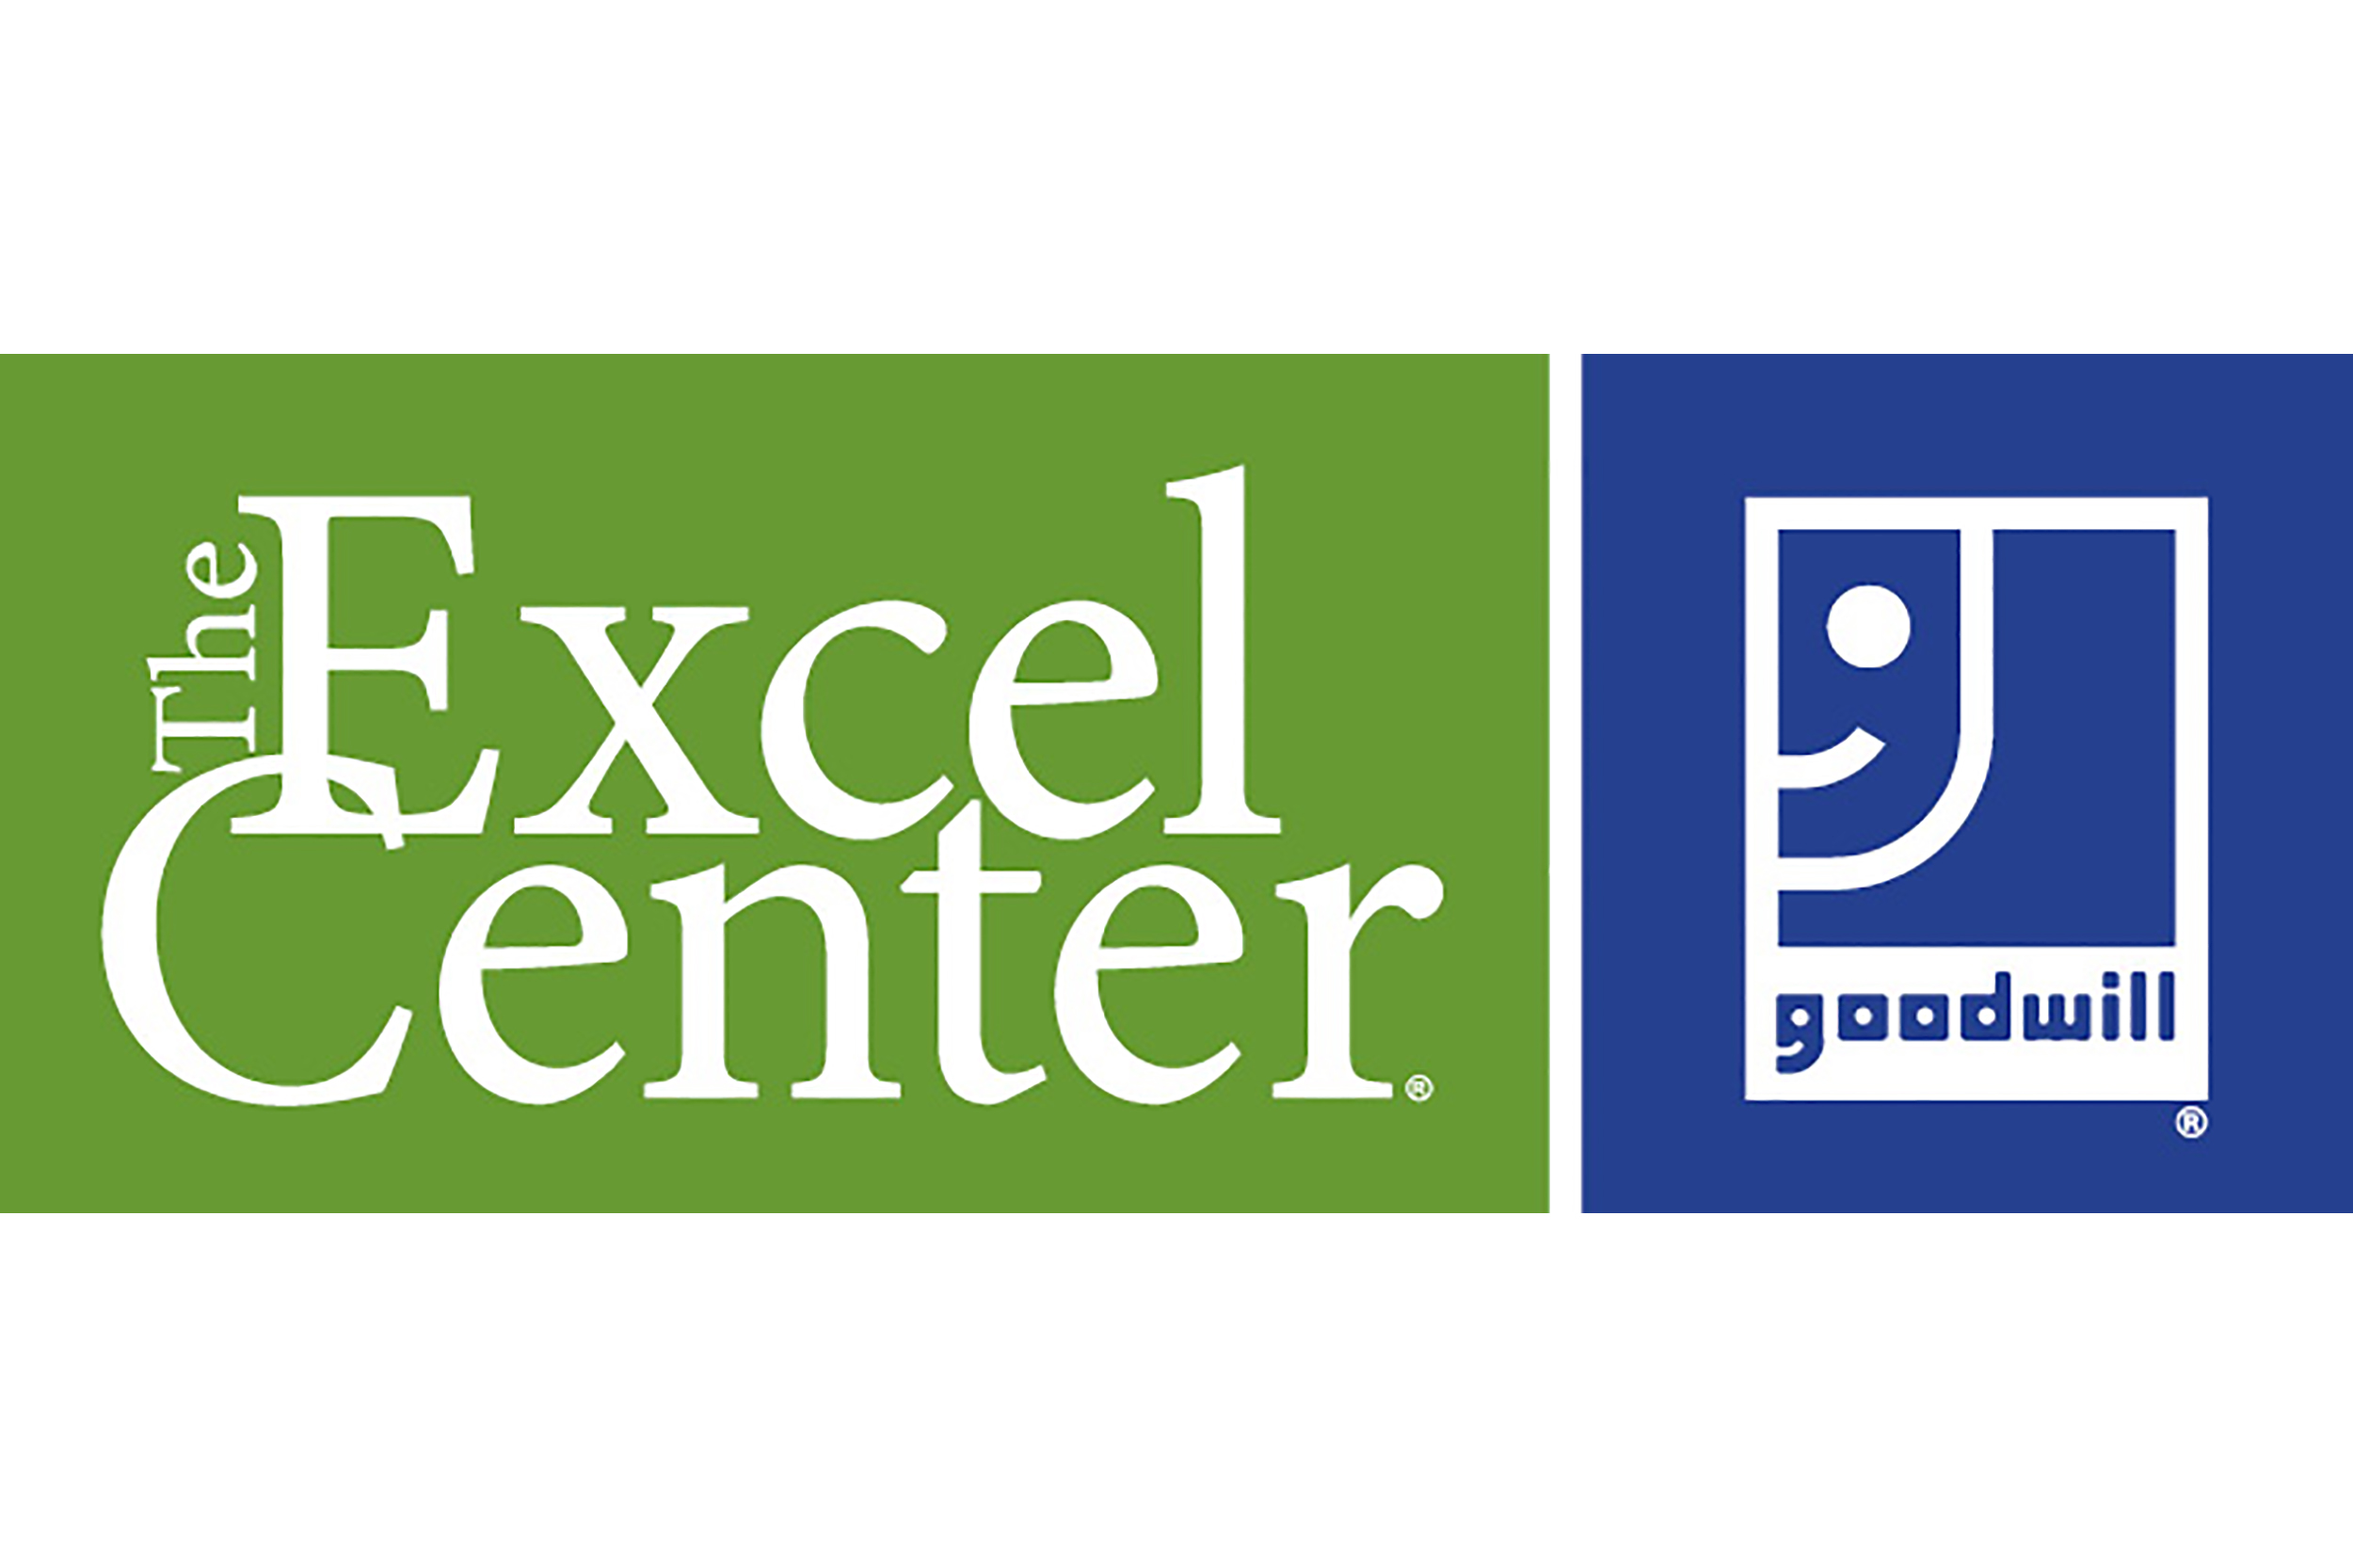 Arizona opens its first Goodwill Excel Center